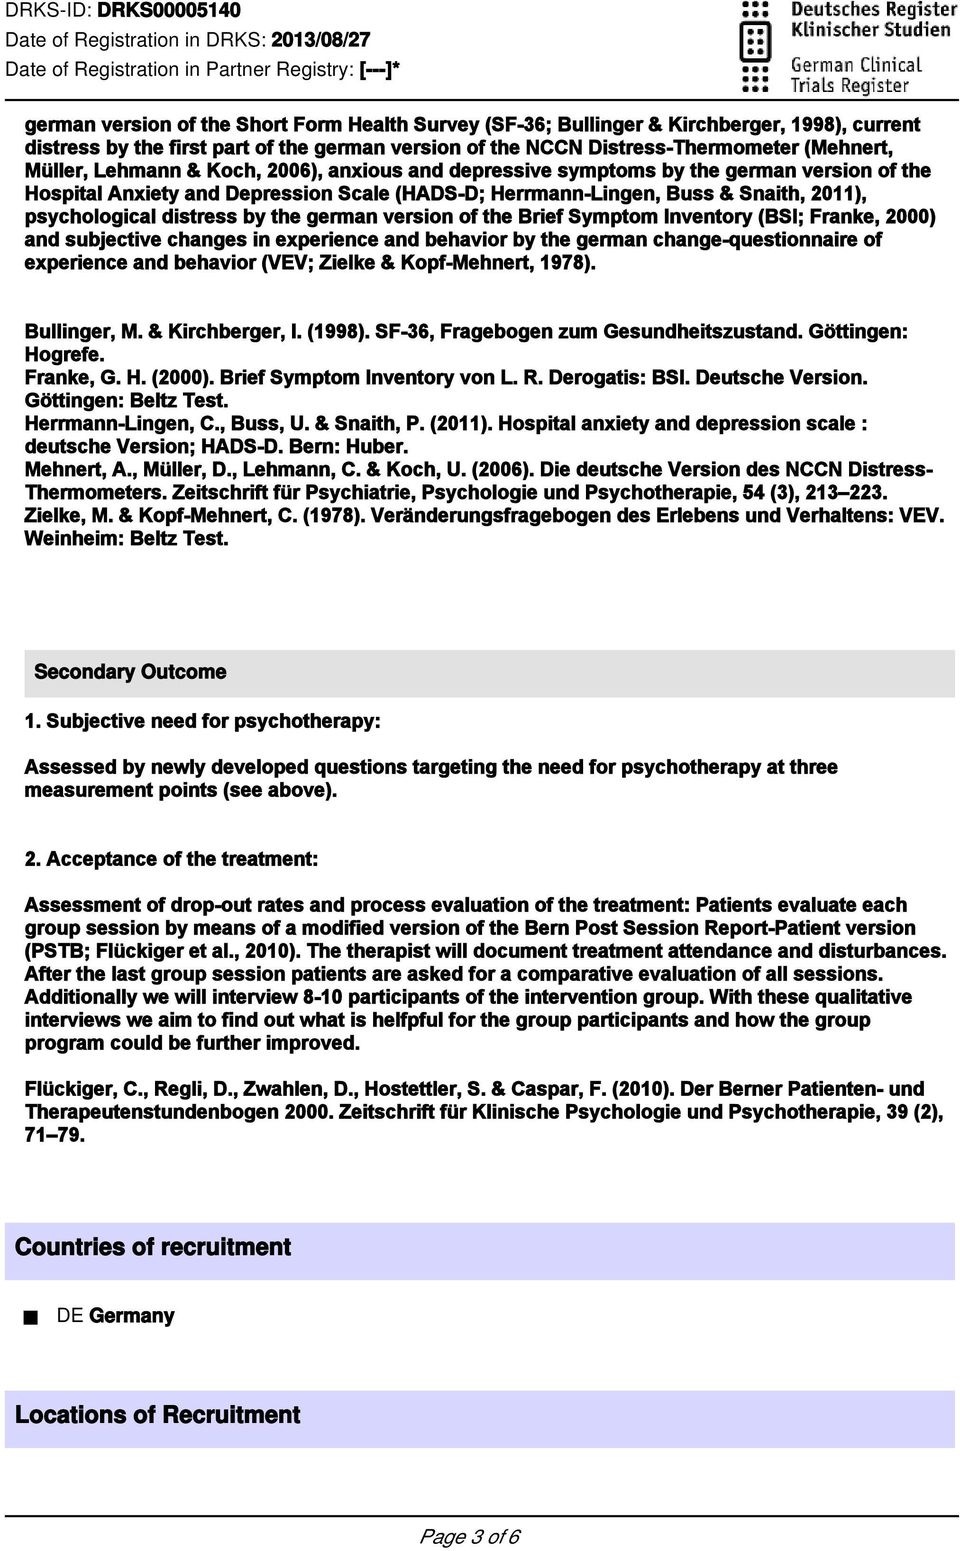 german version of the Brief Symptom Inventory (BSI; Franke, 2000) and subjective changes in experience and behavior by the german change-questionnaire of experience and behavior (VEV; Zielke &